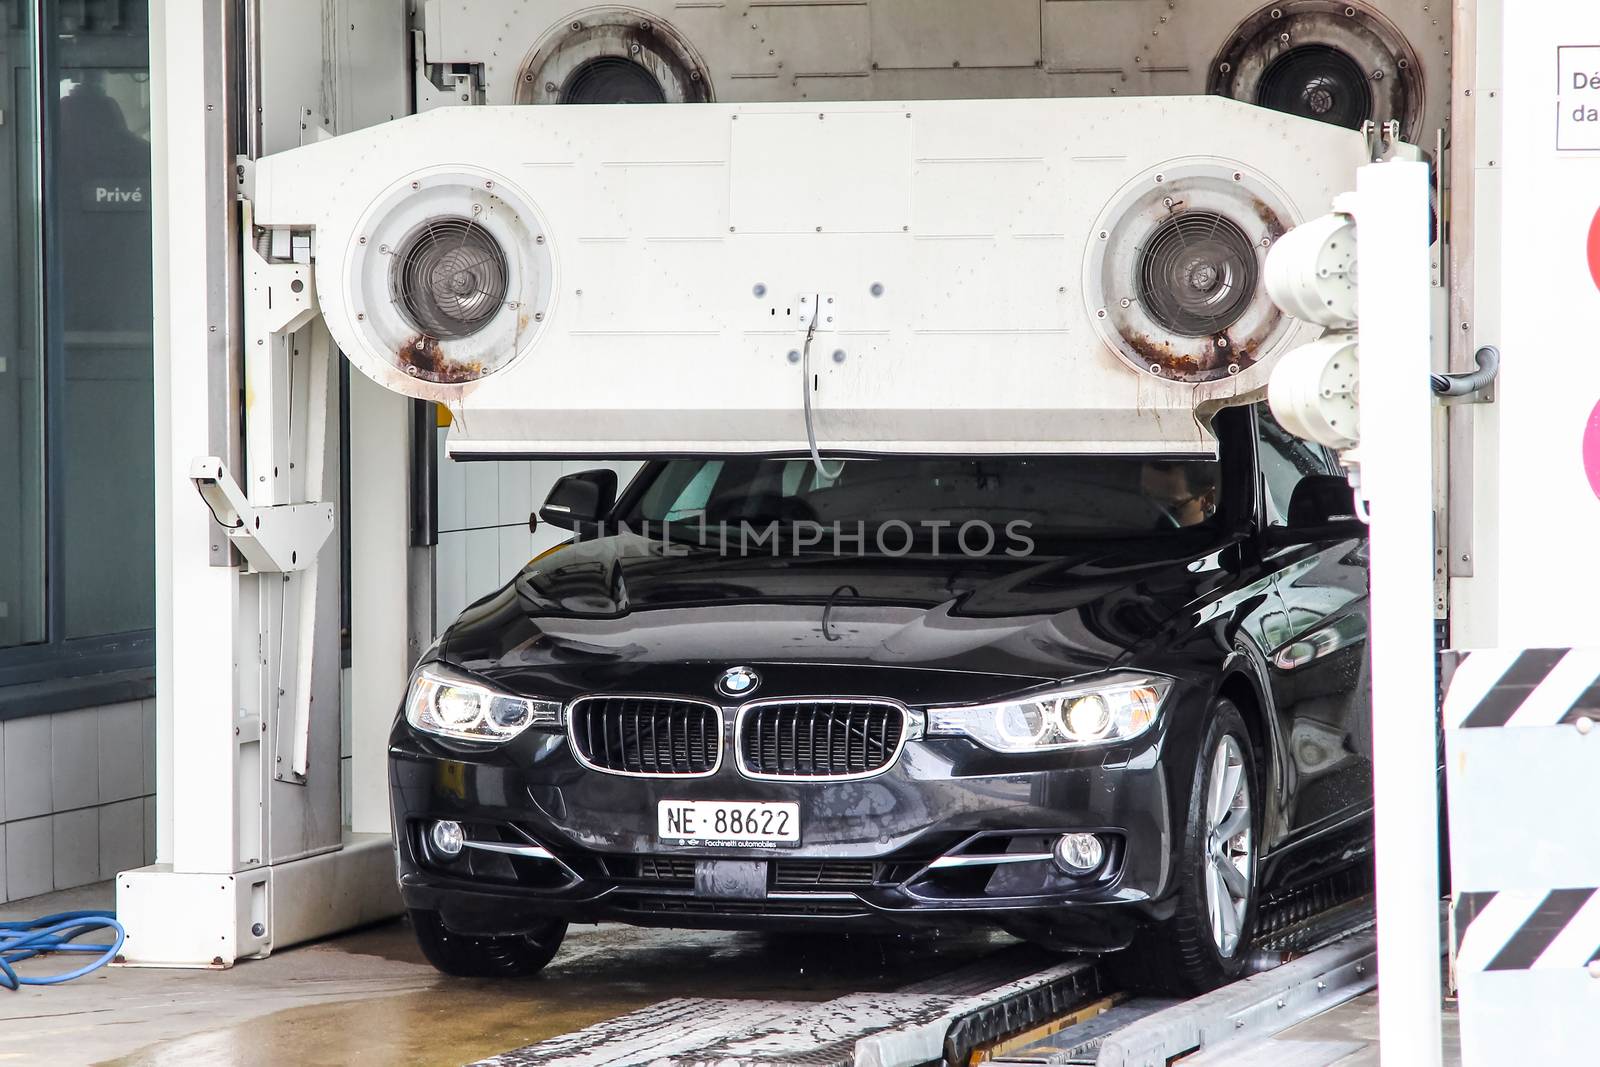 MONTREUX, SWITZERLAND - AUGUST 6, 2014: Motor car BMW F30 3-series at the car wash service station.